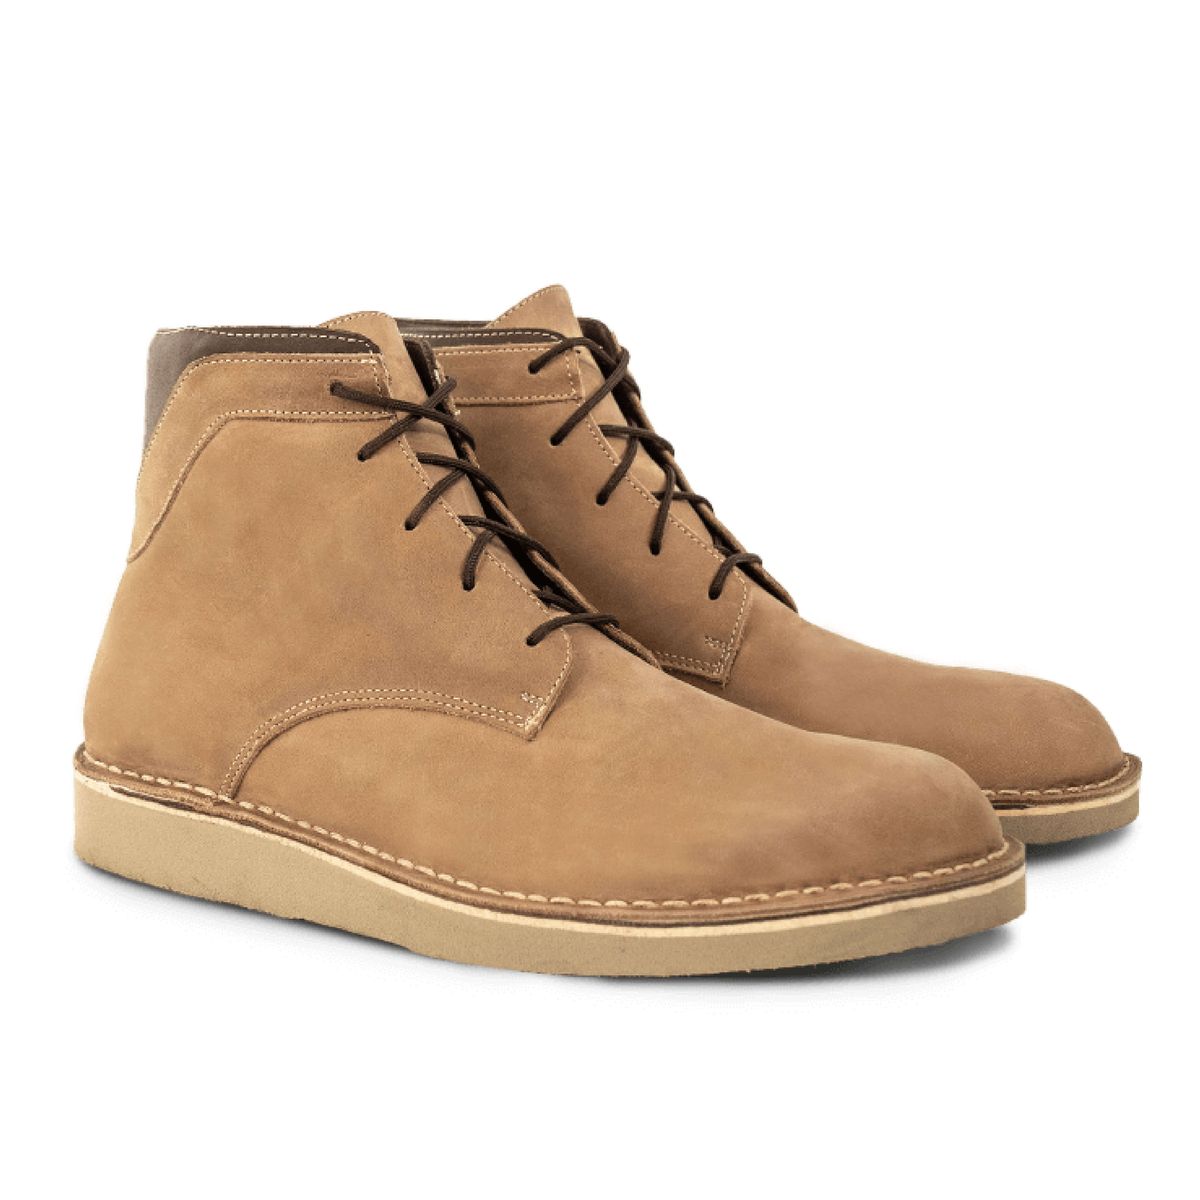 Men's Super Vellie Boots - Oiled Milled Nubuck - Stone - Curve Gear ...